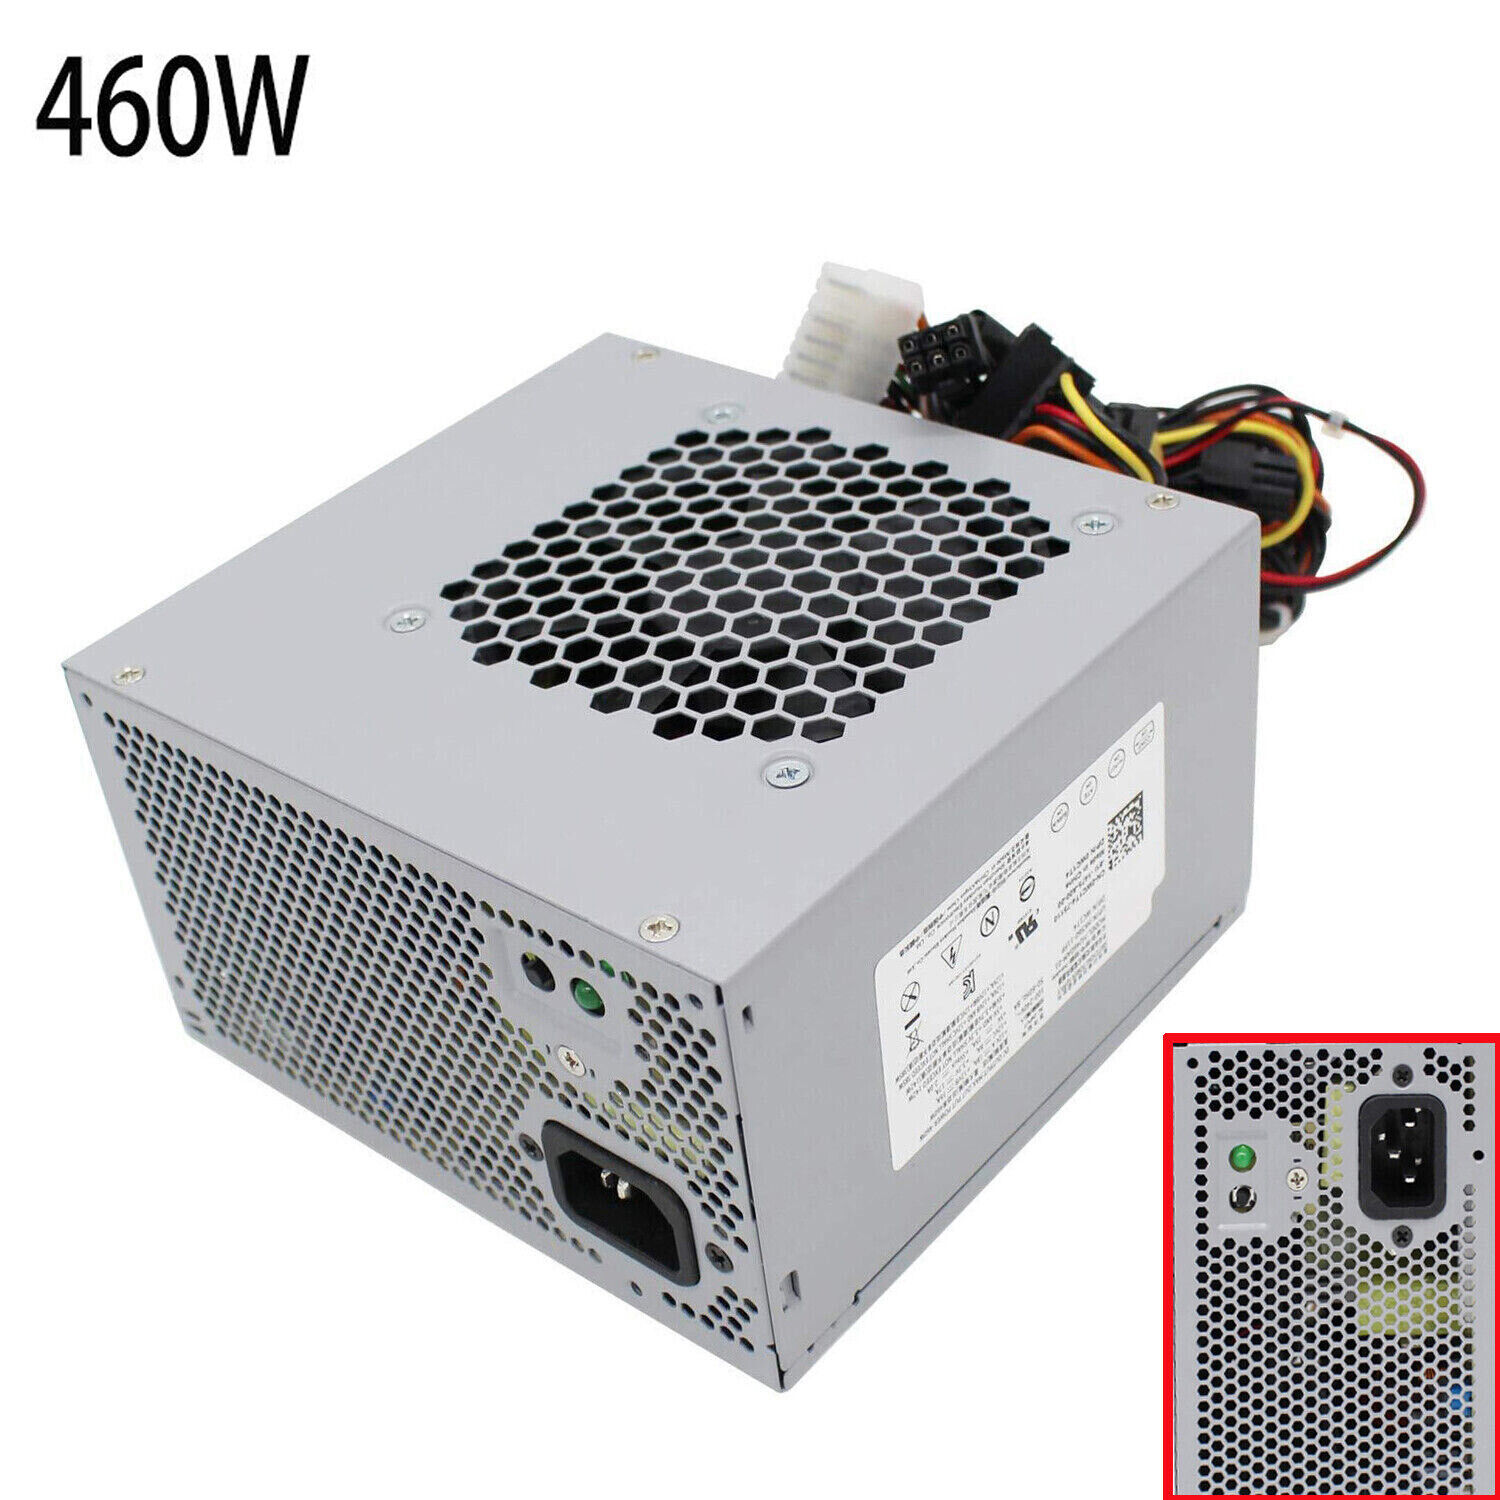 New 460W PSU Power Supply D460AM03 For DELL XPS 8910 8920 8300 8900 8700 8500 R5